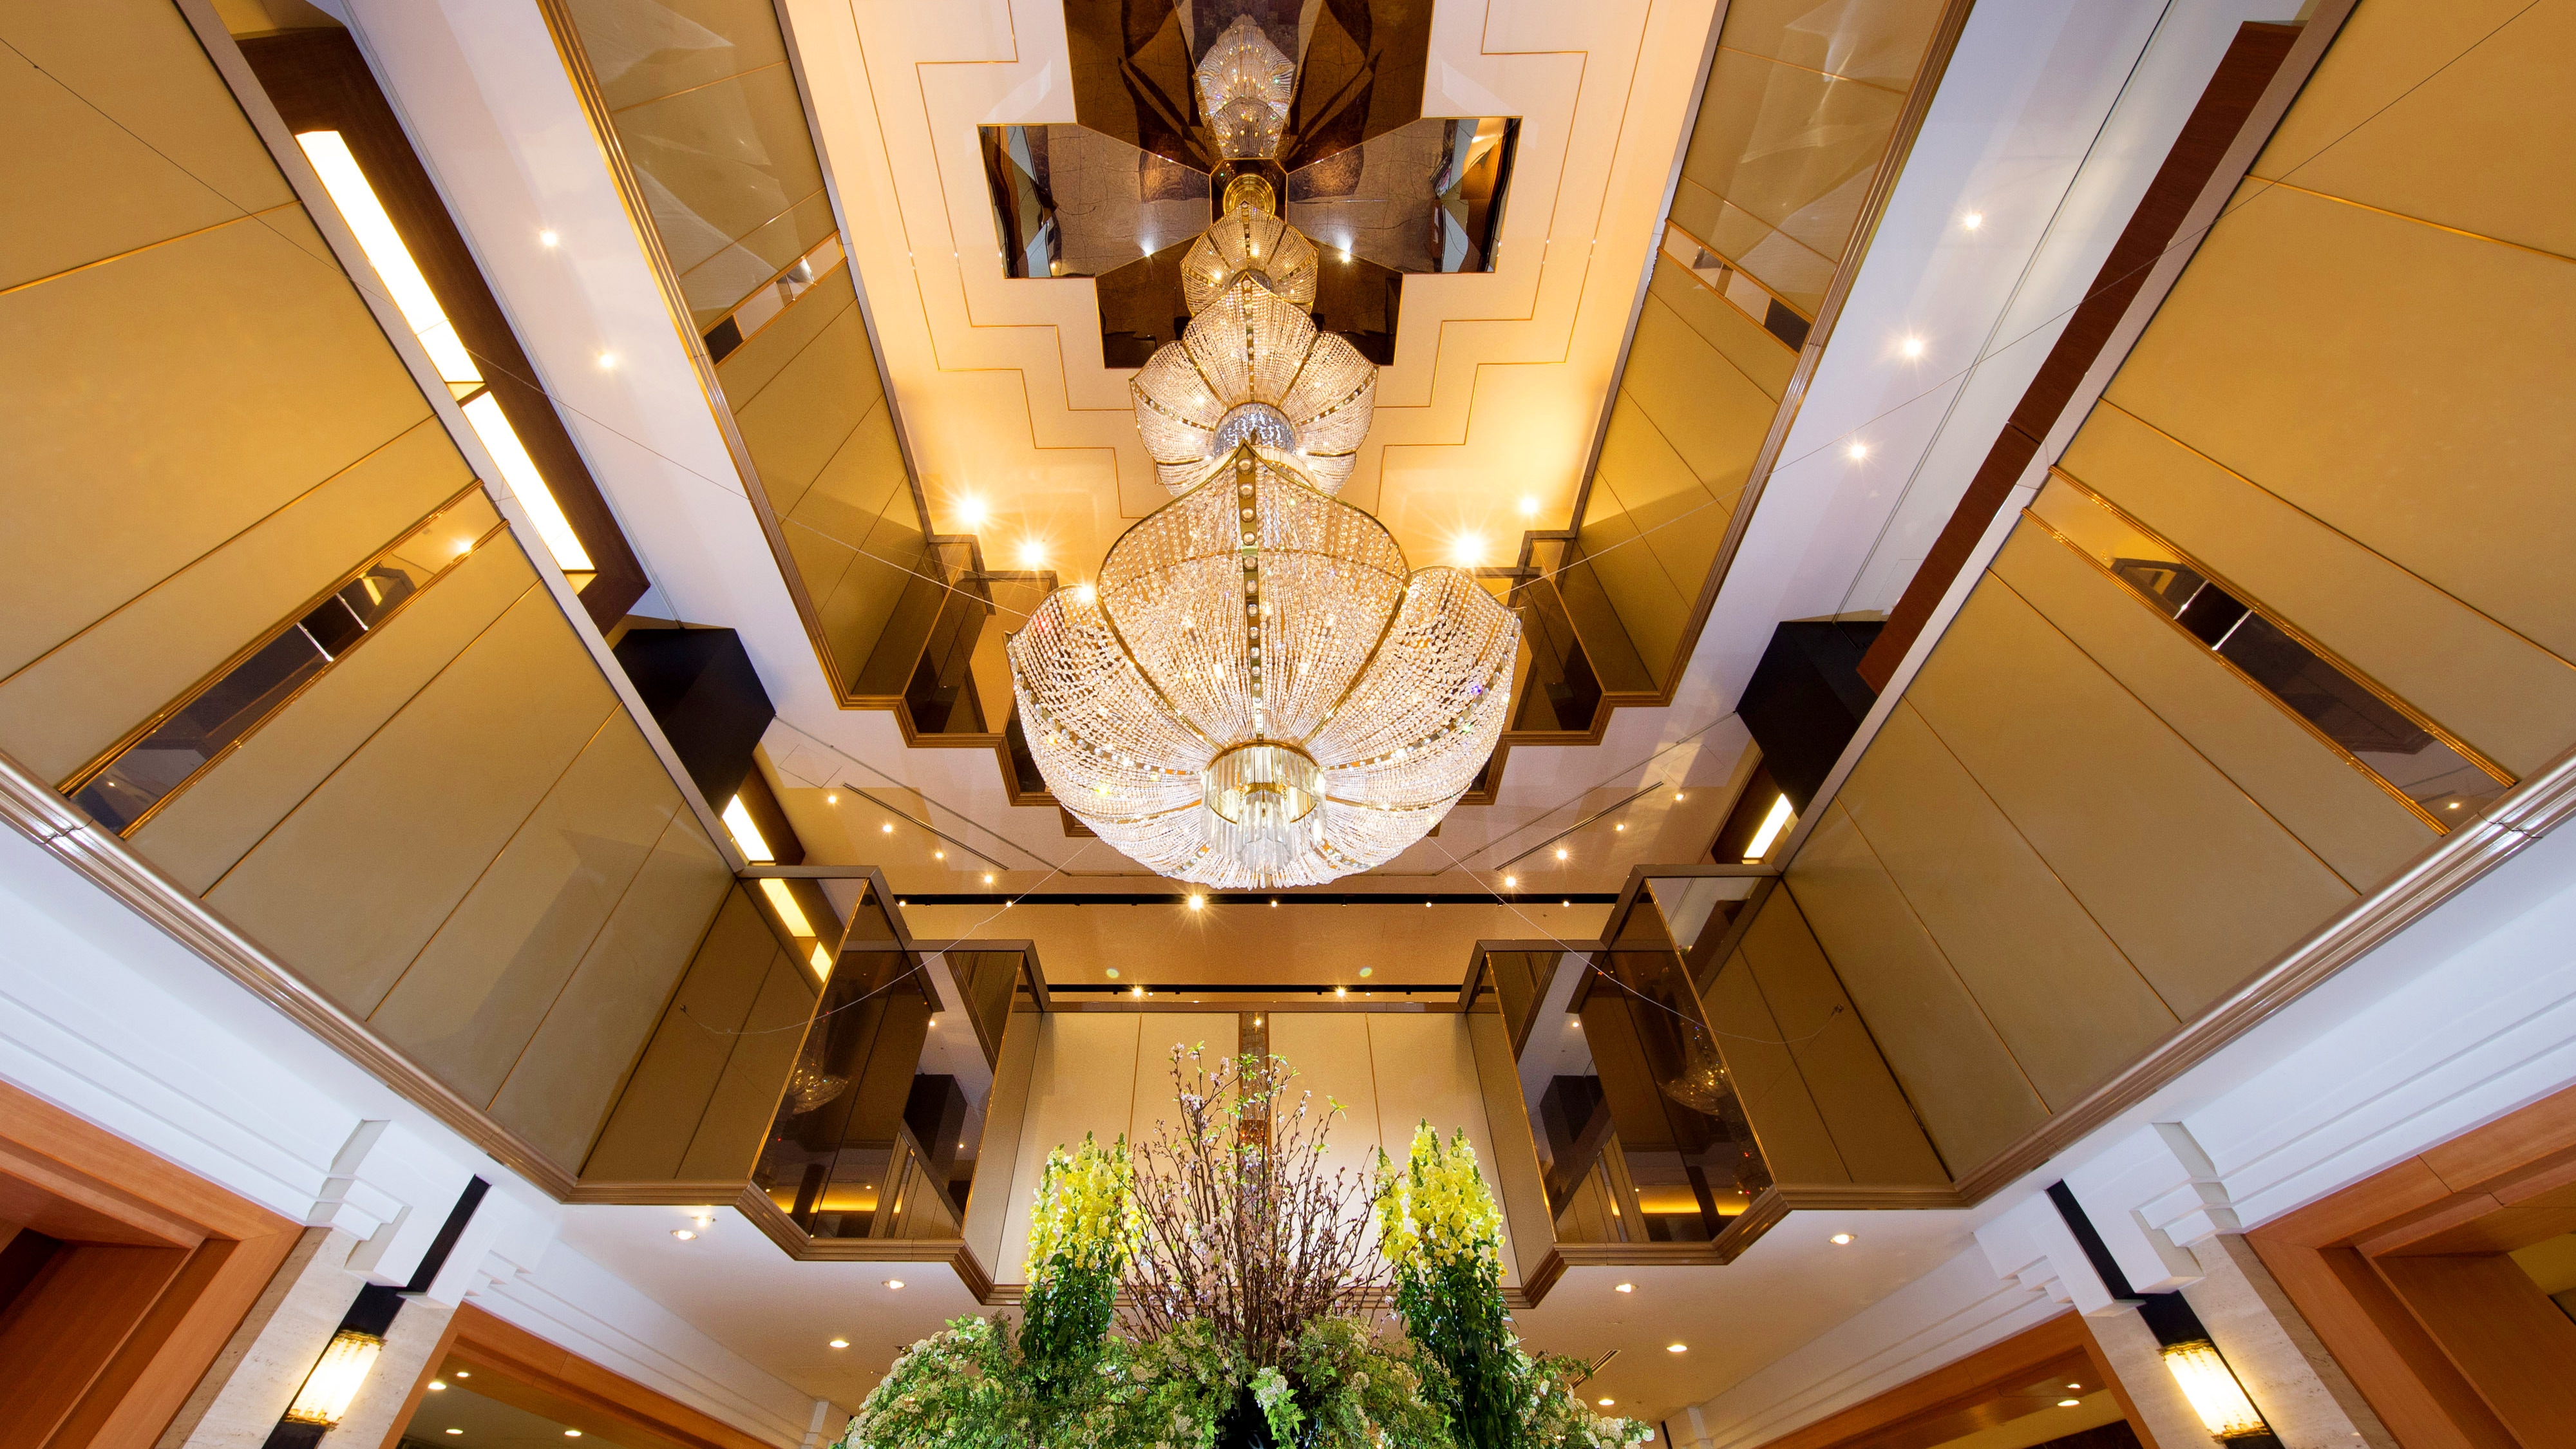 A huge chandelier welcomes you as you pass through the entrance lobby.